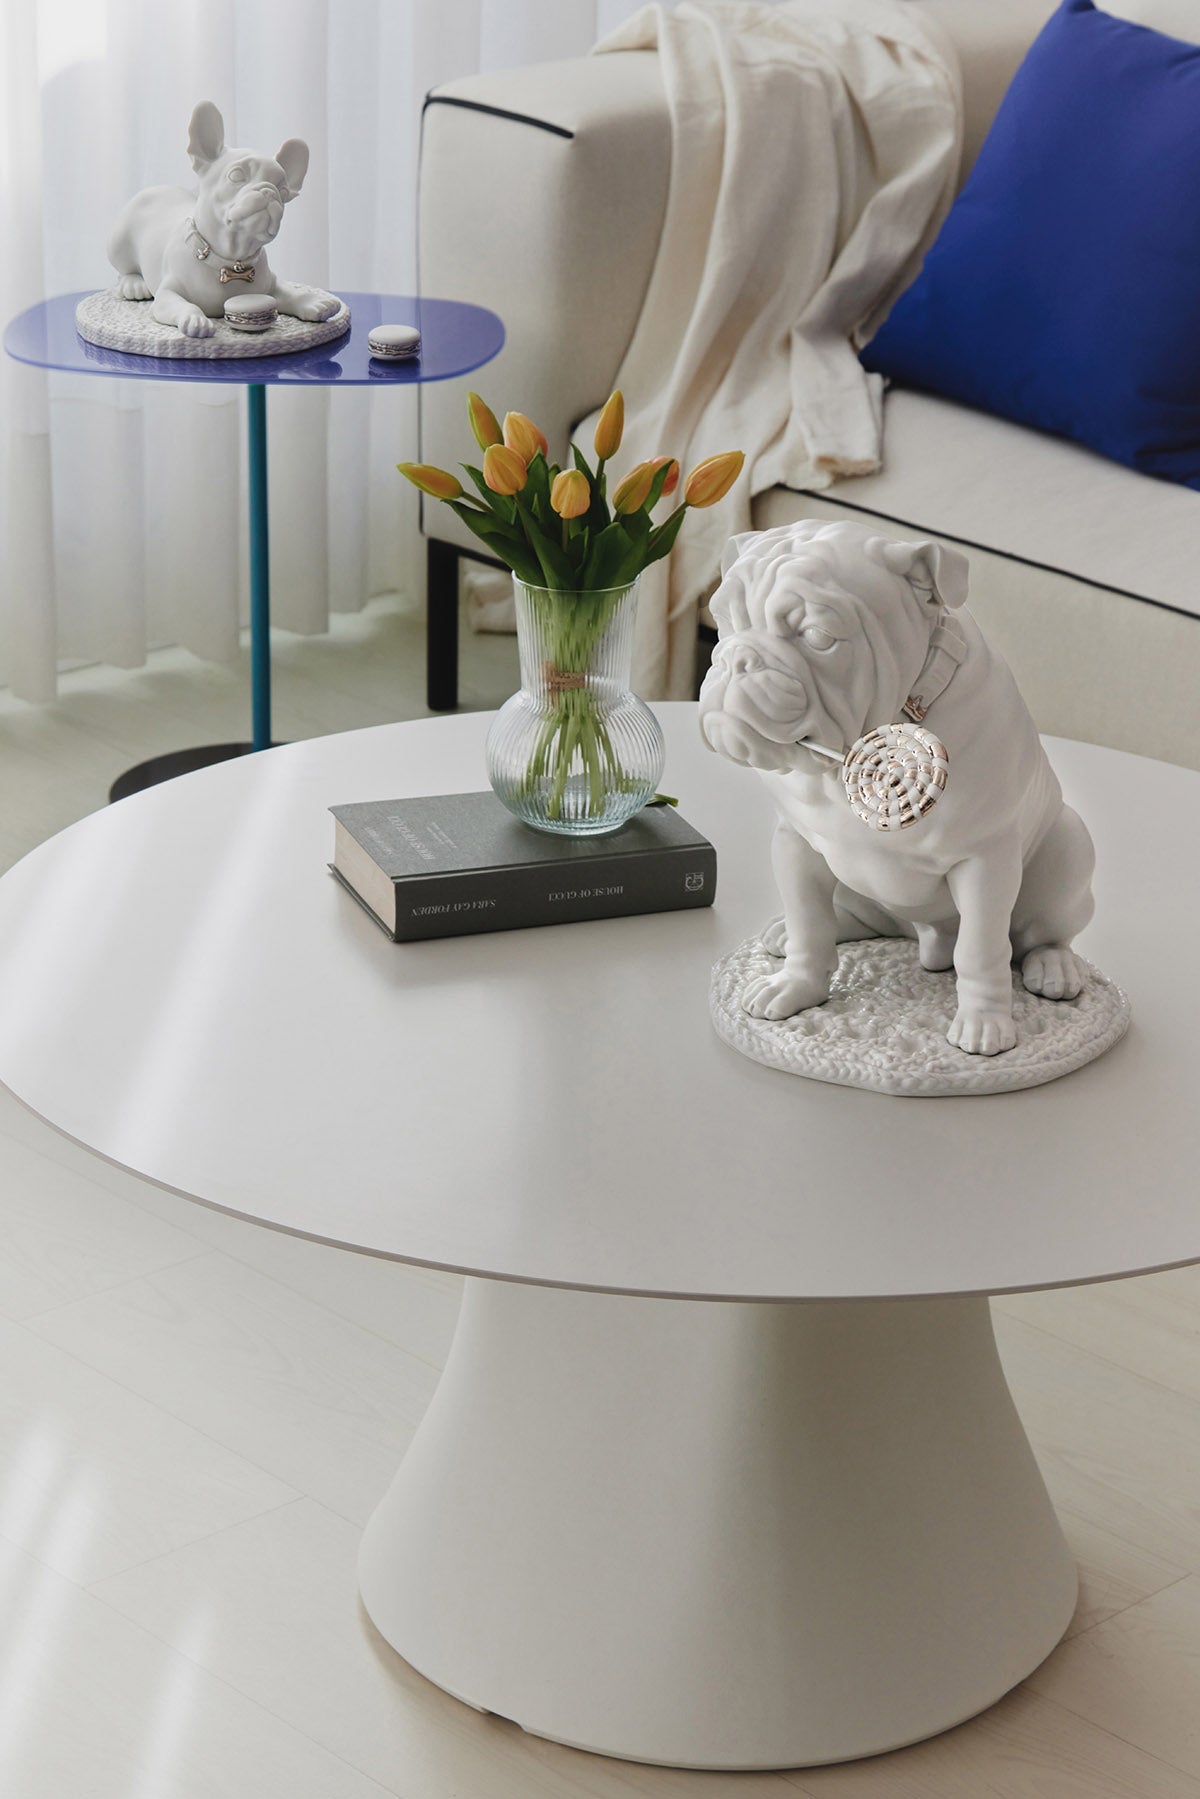 French Bulldog With Macarons Sculpture Re-Deco